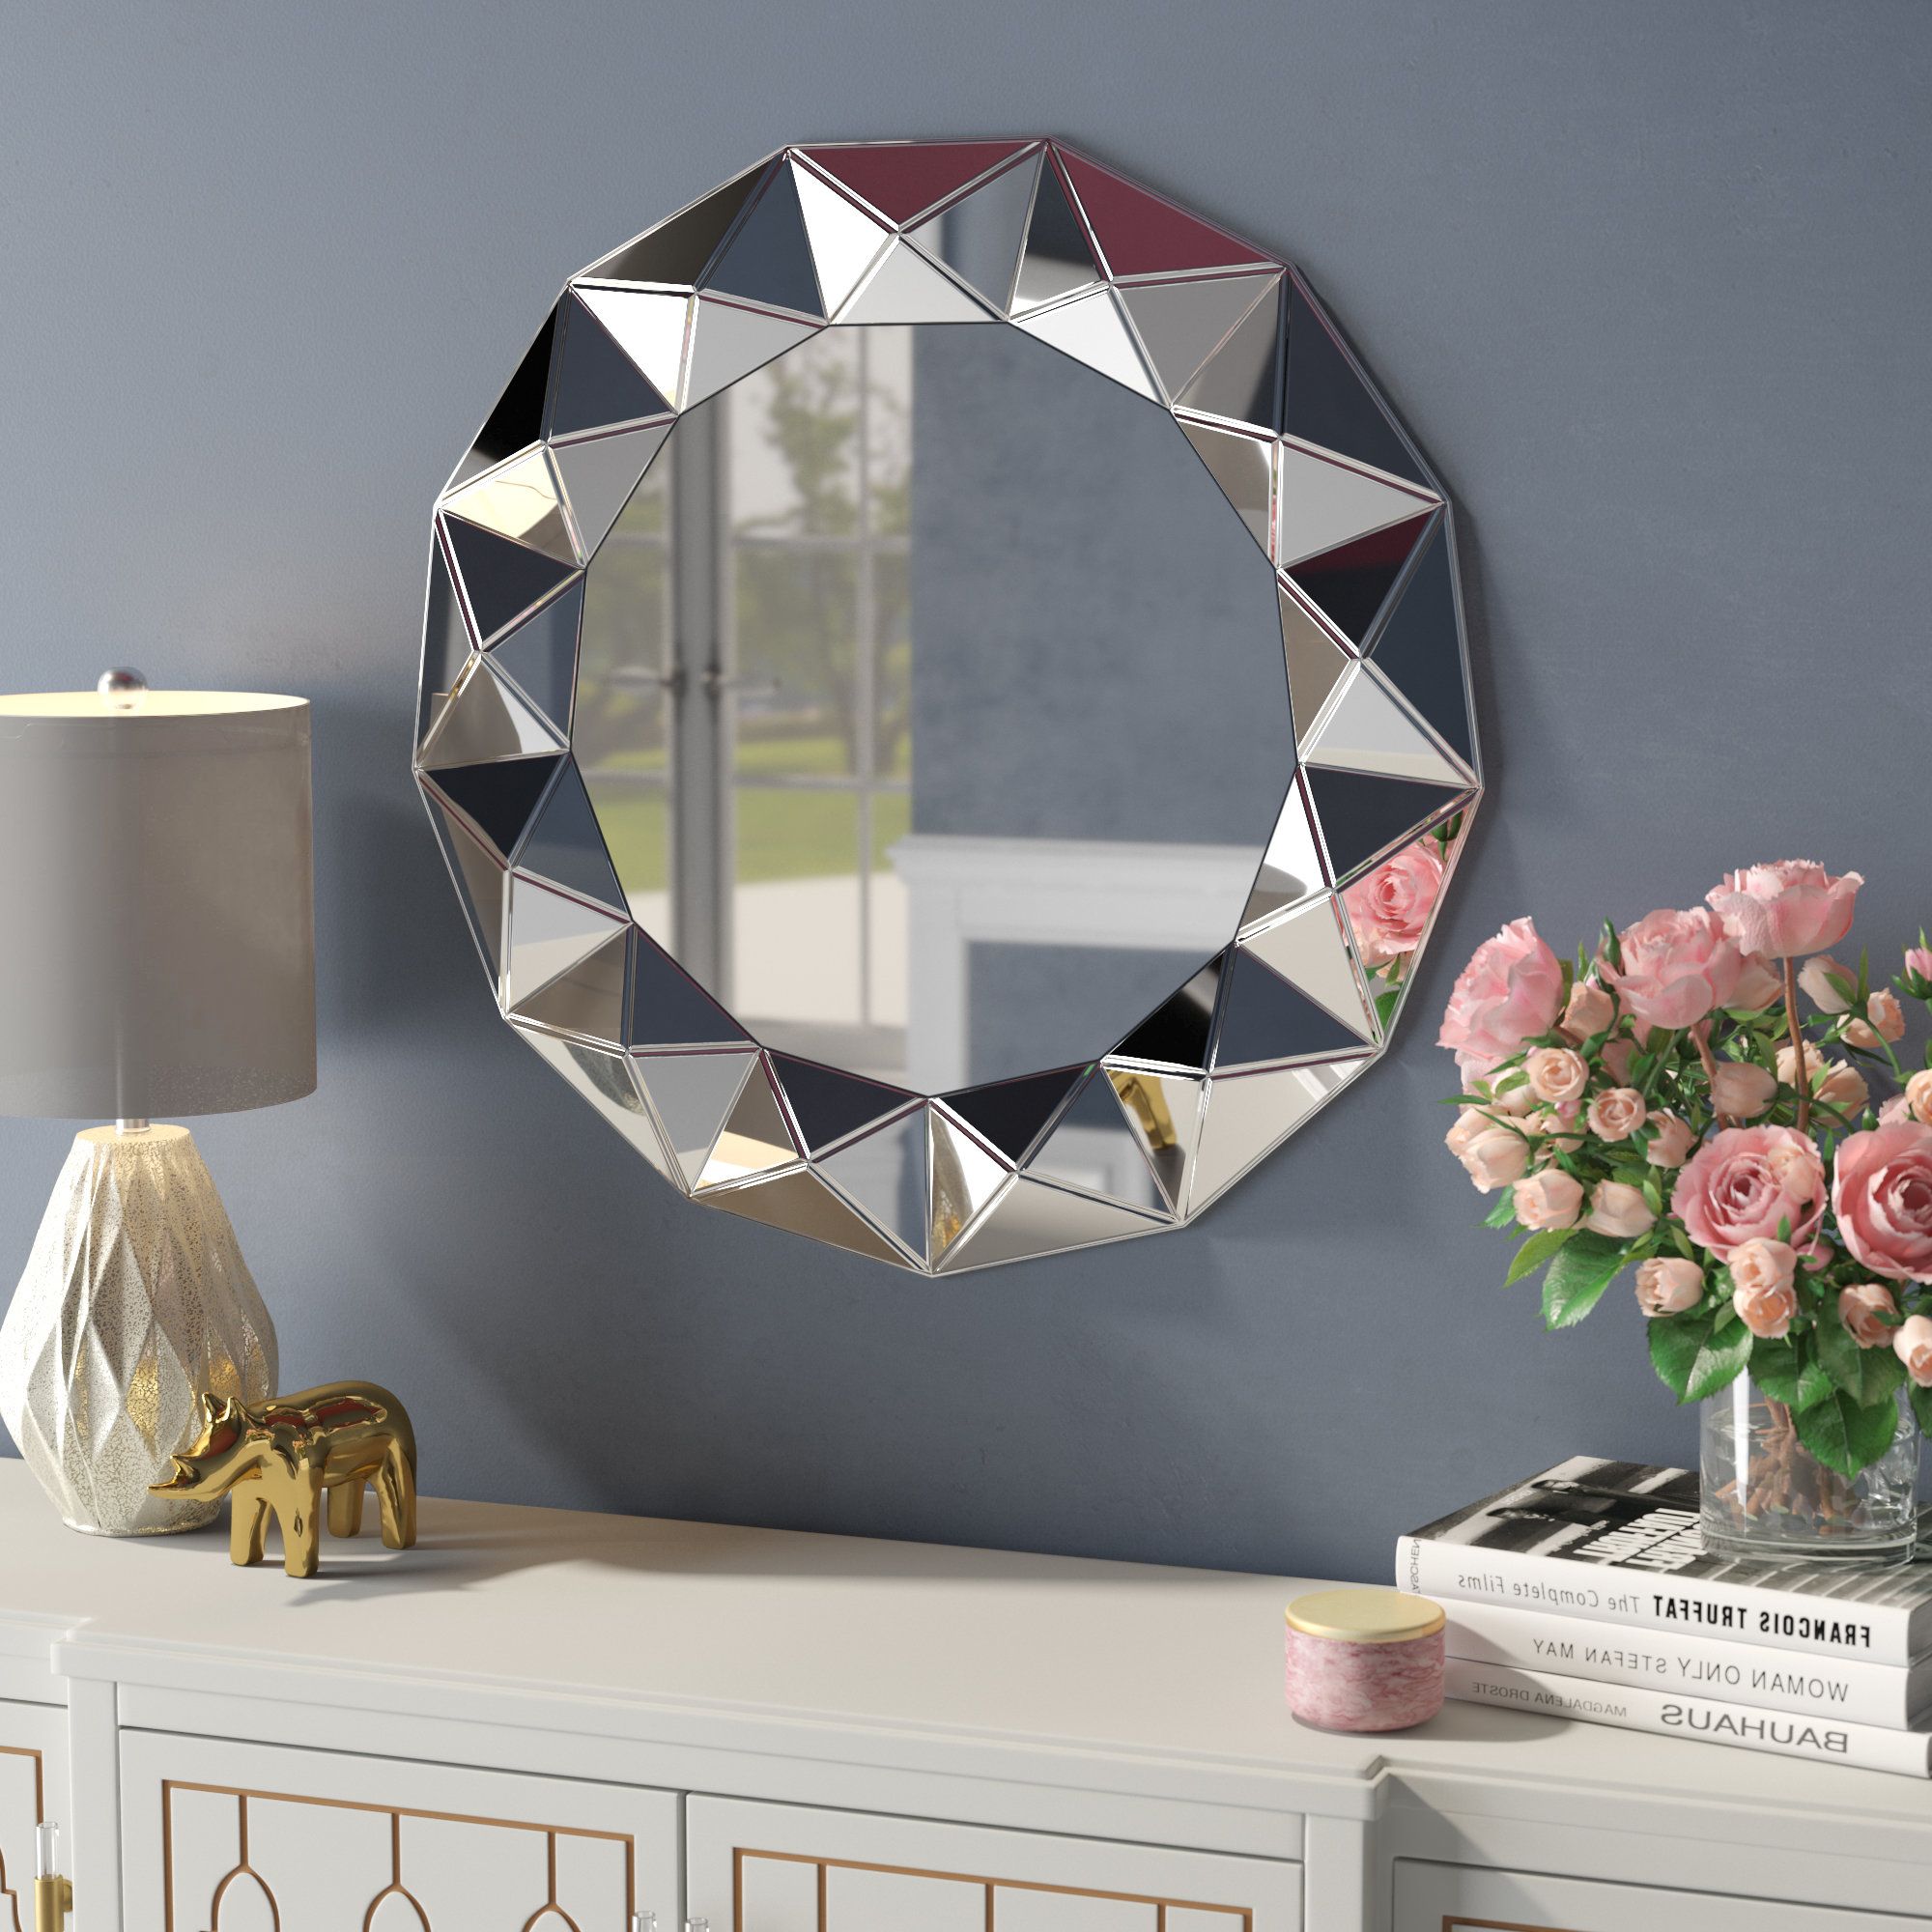 Decorative Round Wall Mirrors For Best And Newest Traditional Round Decorative Wall Mirror (View 14 of 20)